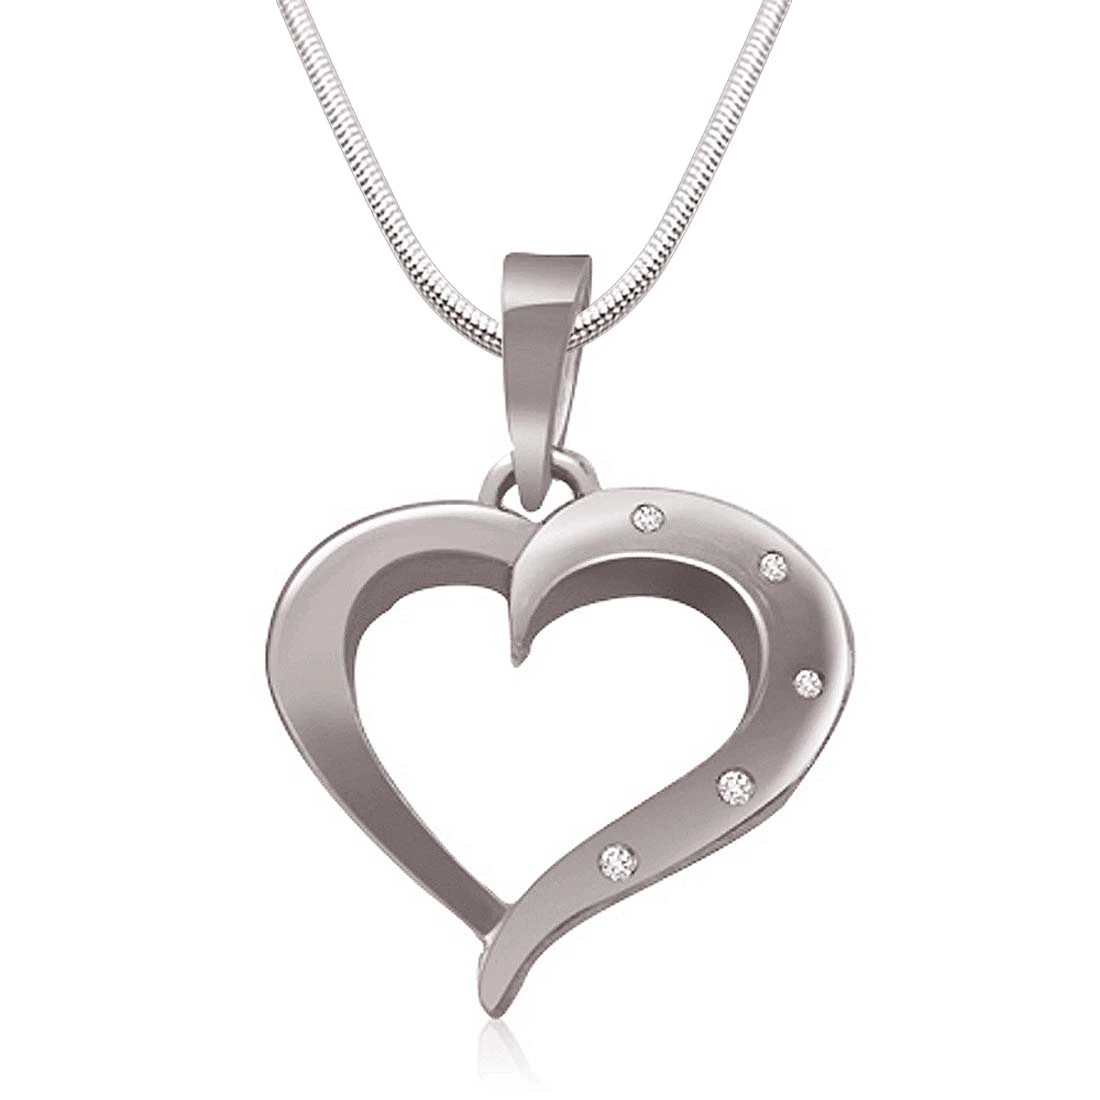 Love Affair - Real Diamond & Sterling Silver Pendant with 18 IN Chain (SDP181)